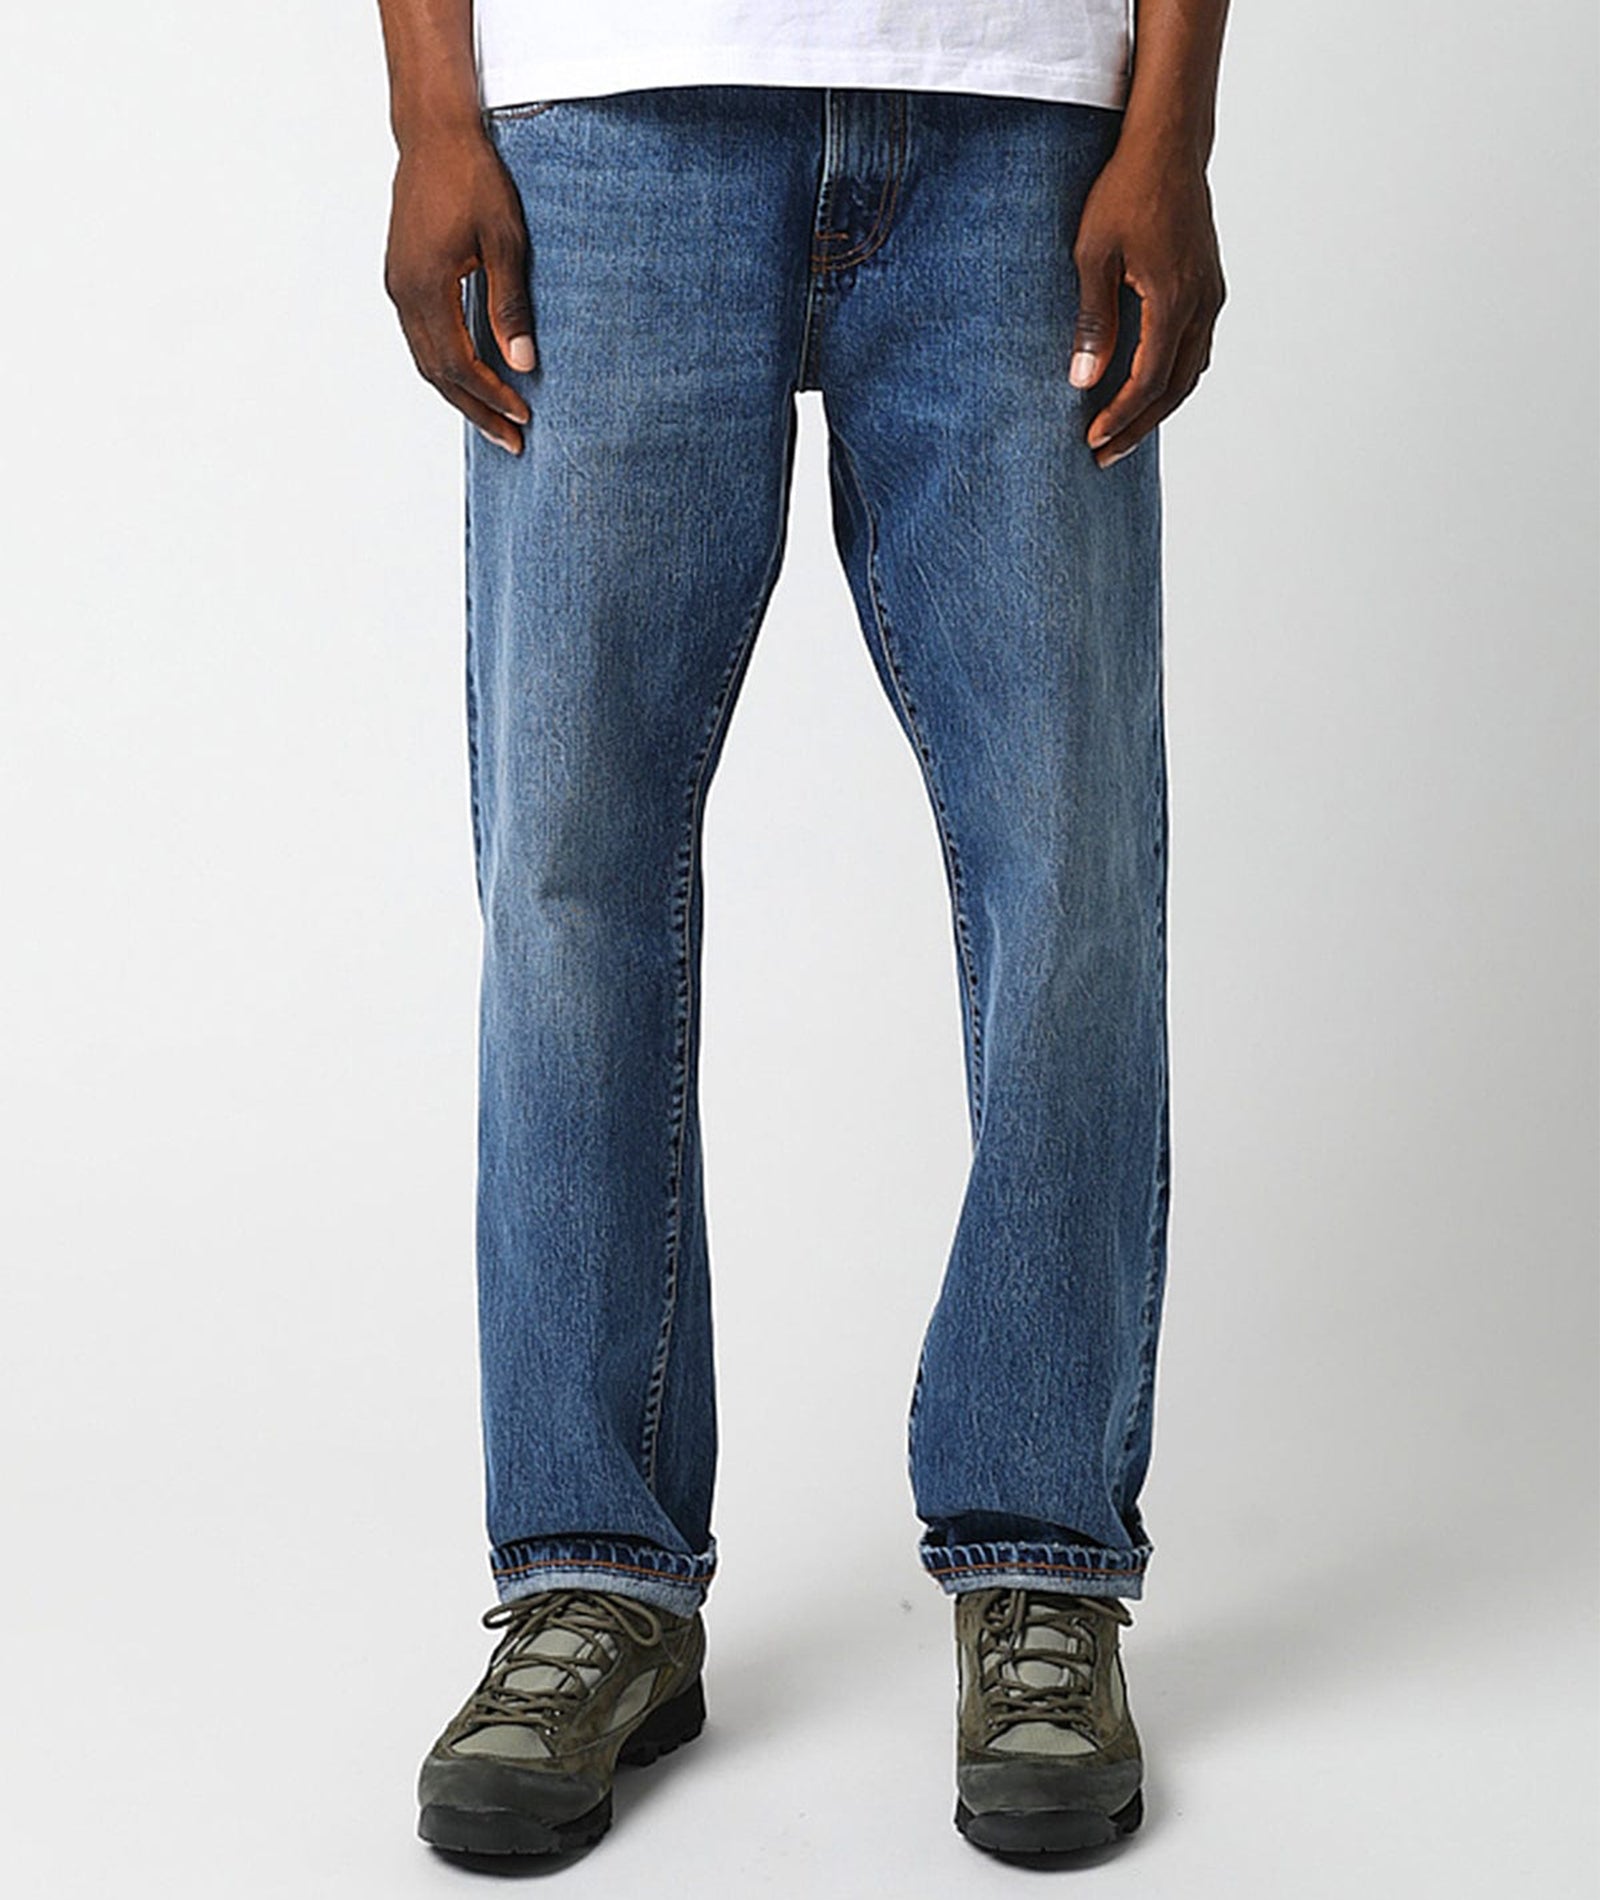 Man wearing jeans made by Corridor